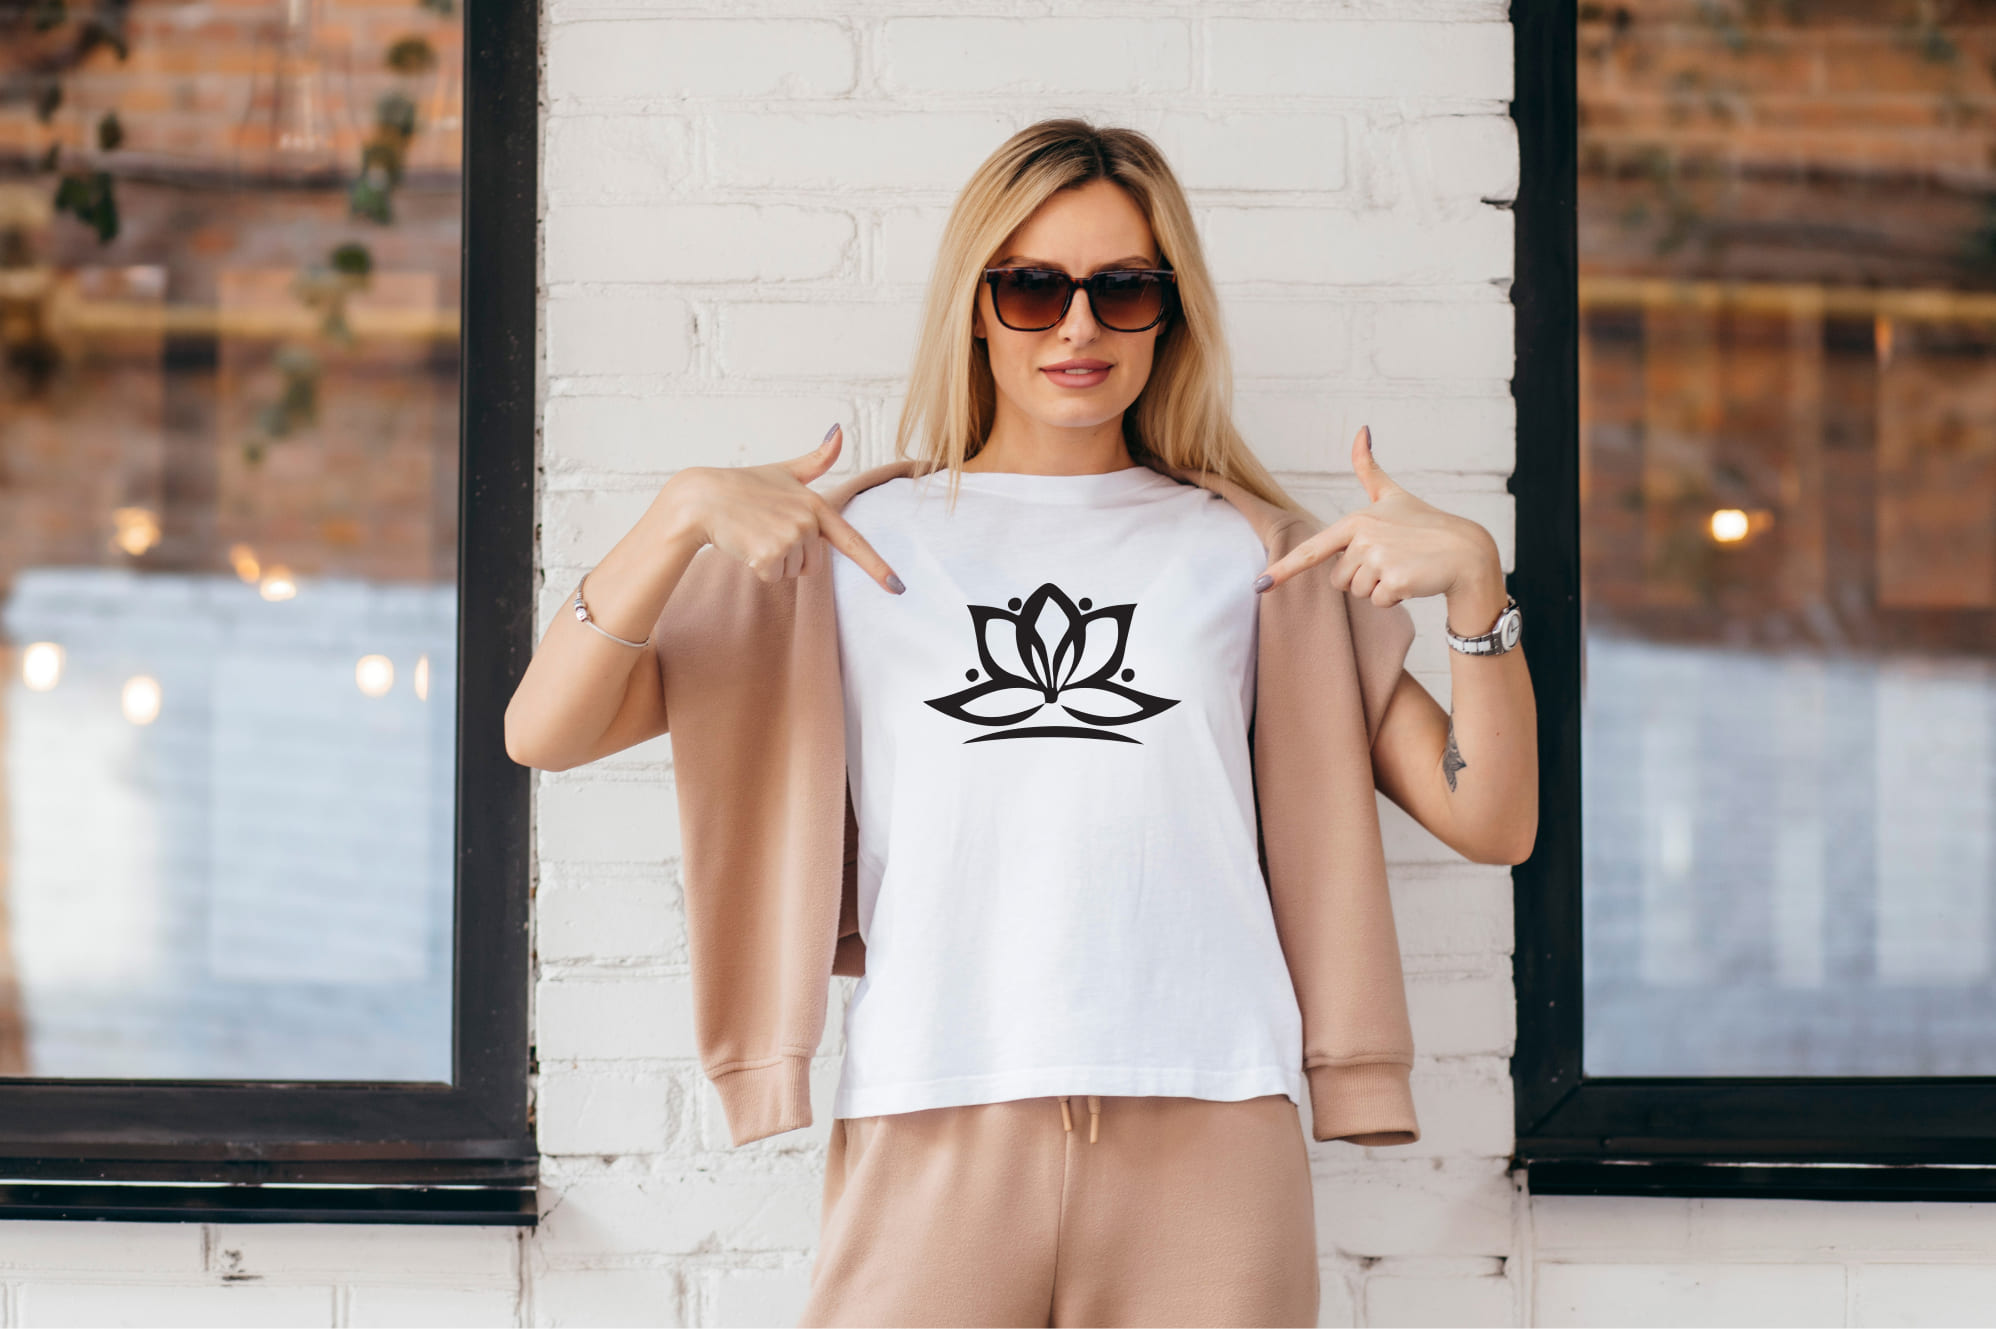 Cool silhouette lotus design on the white t-shirt.